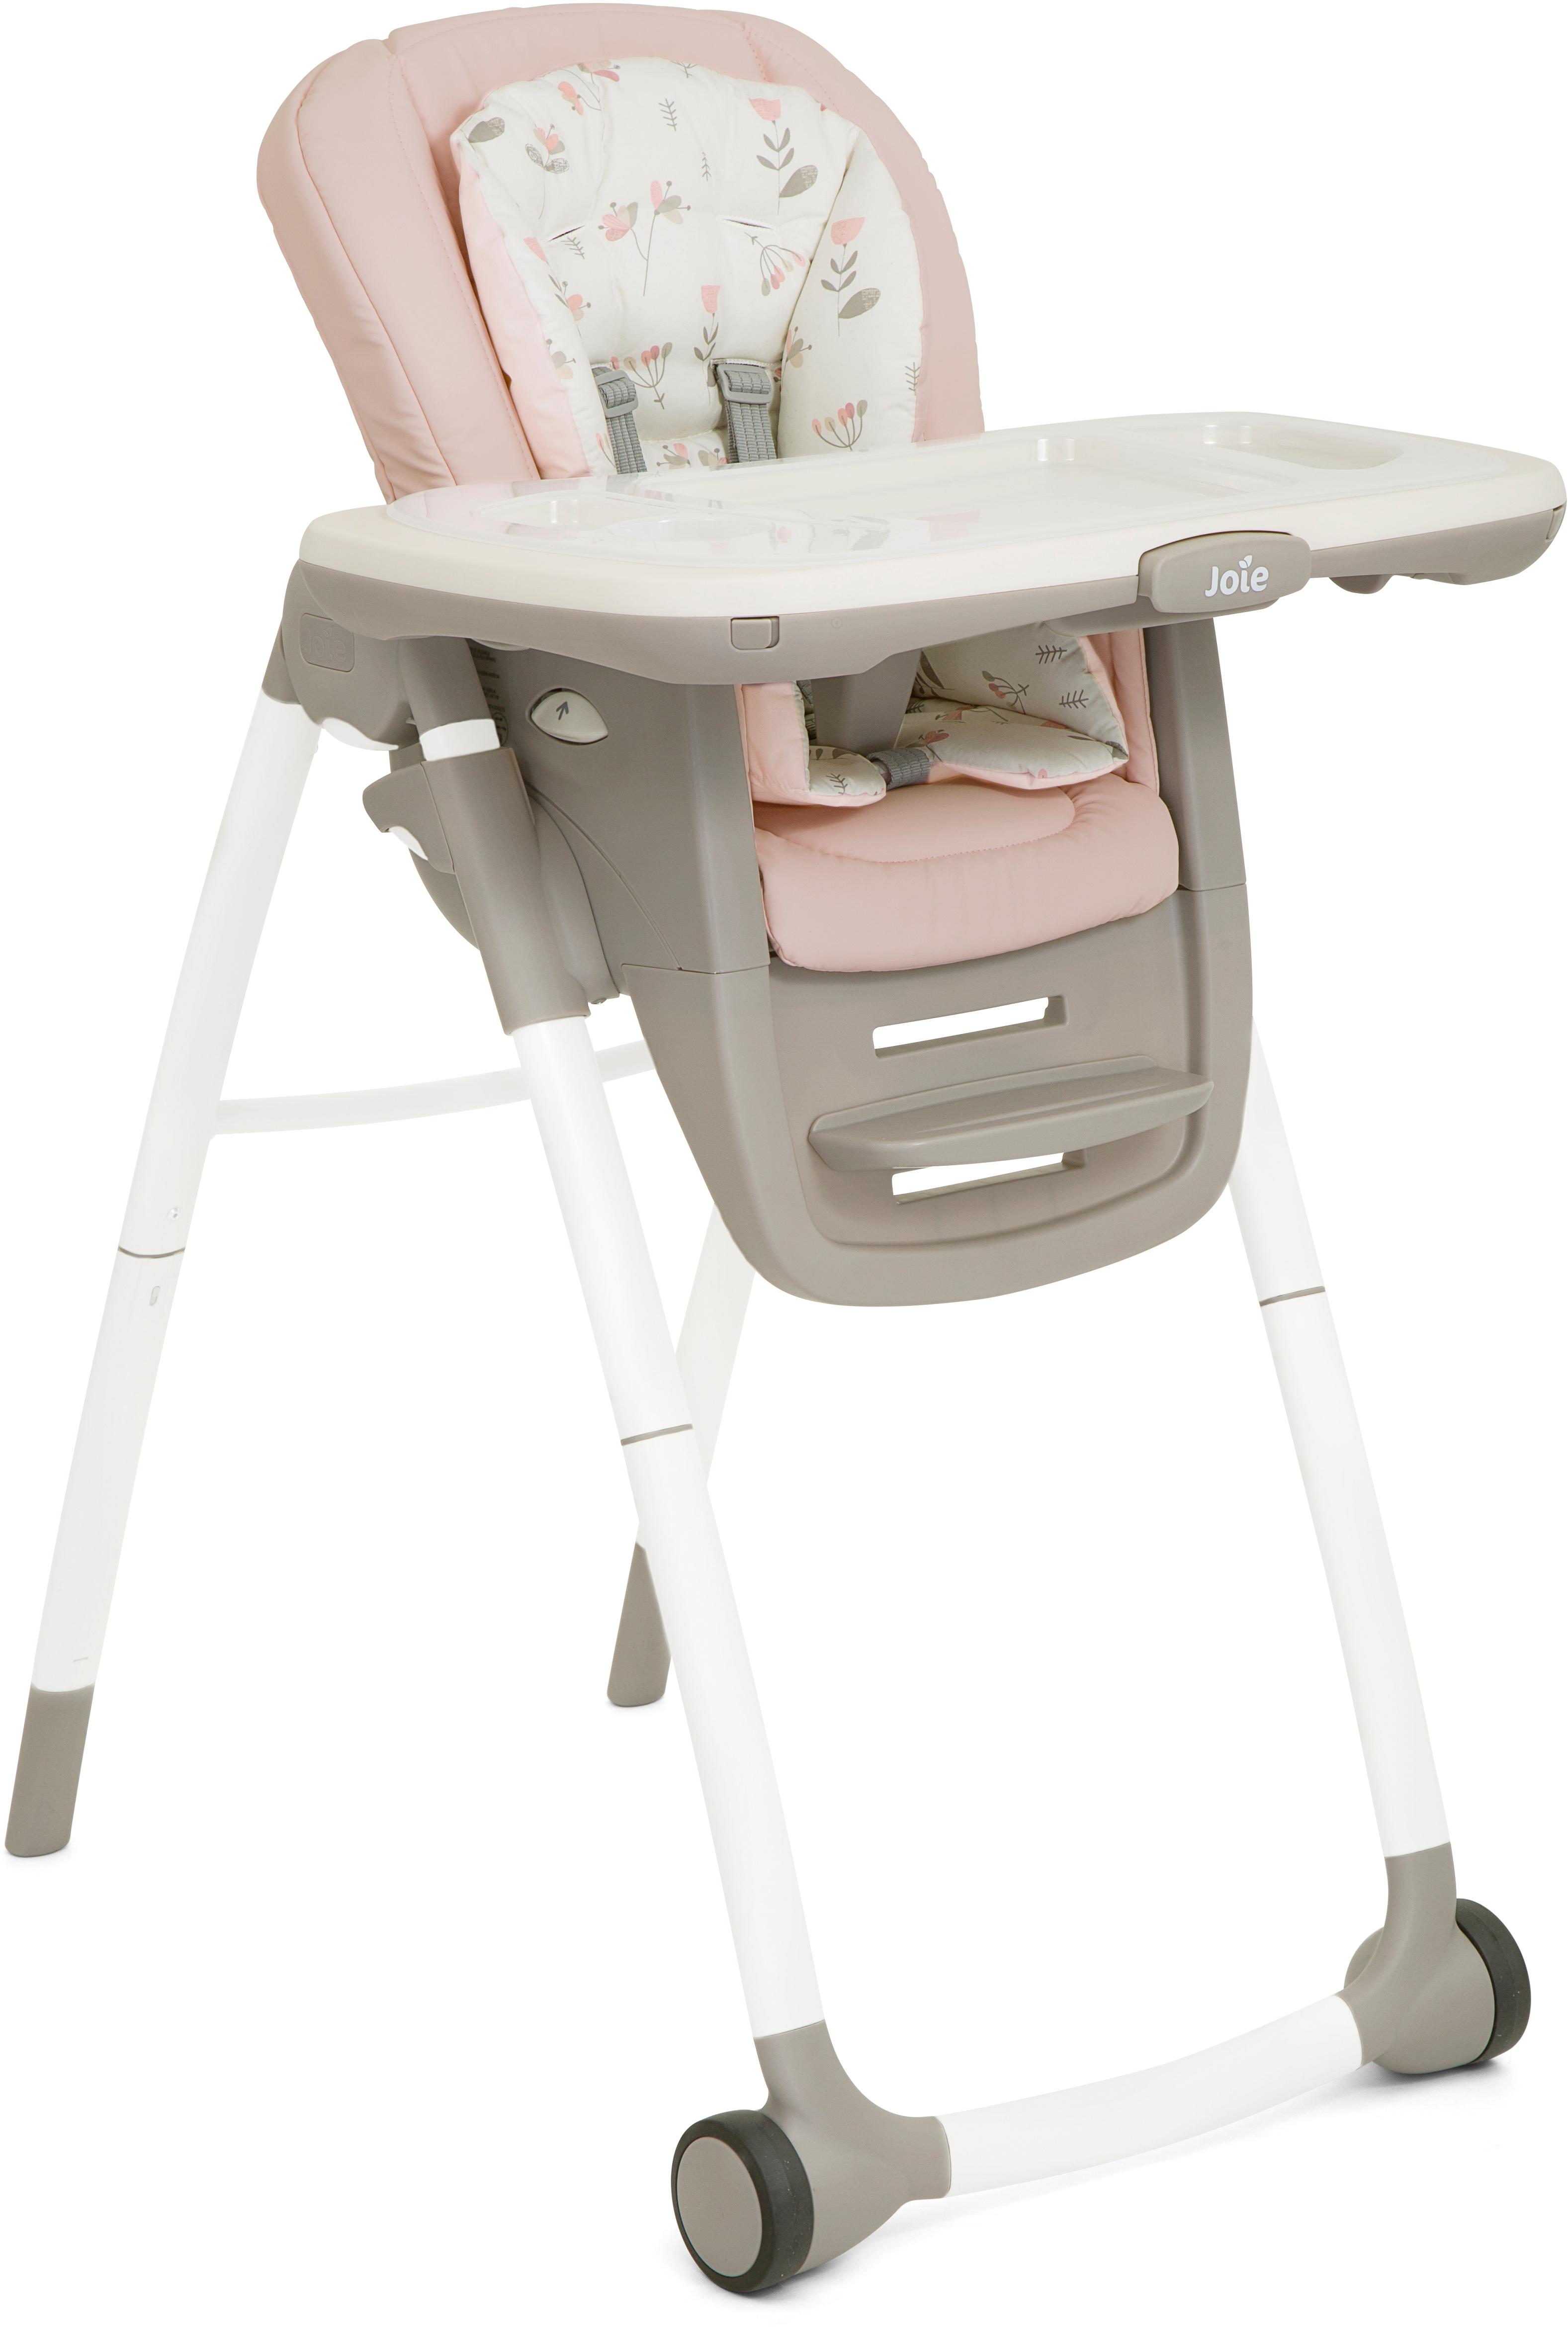 Joie Multiply 6 In 1 High Chair - Forever Flowers